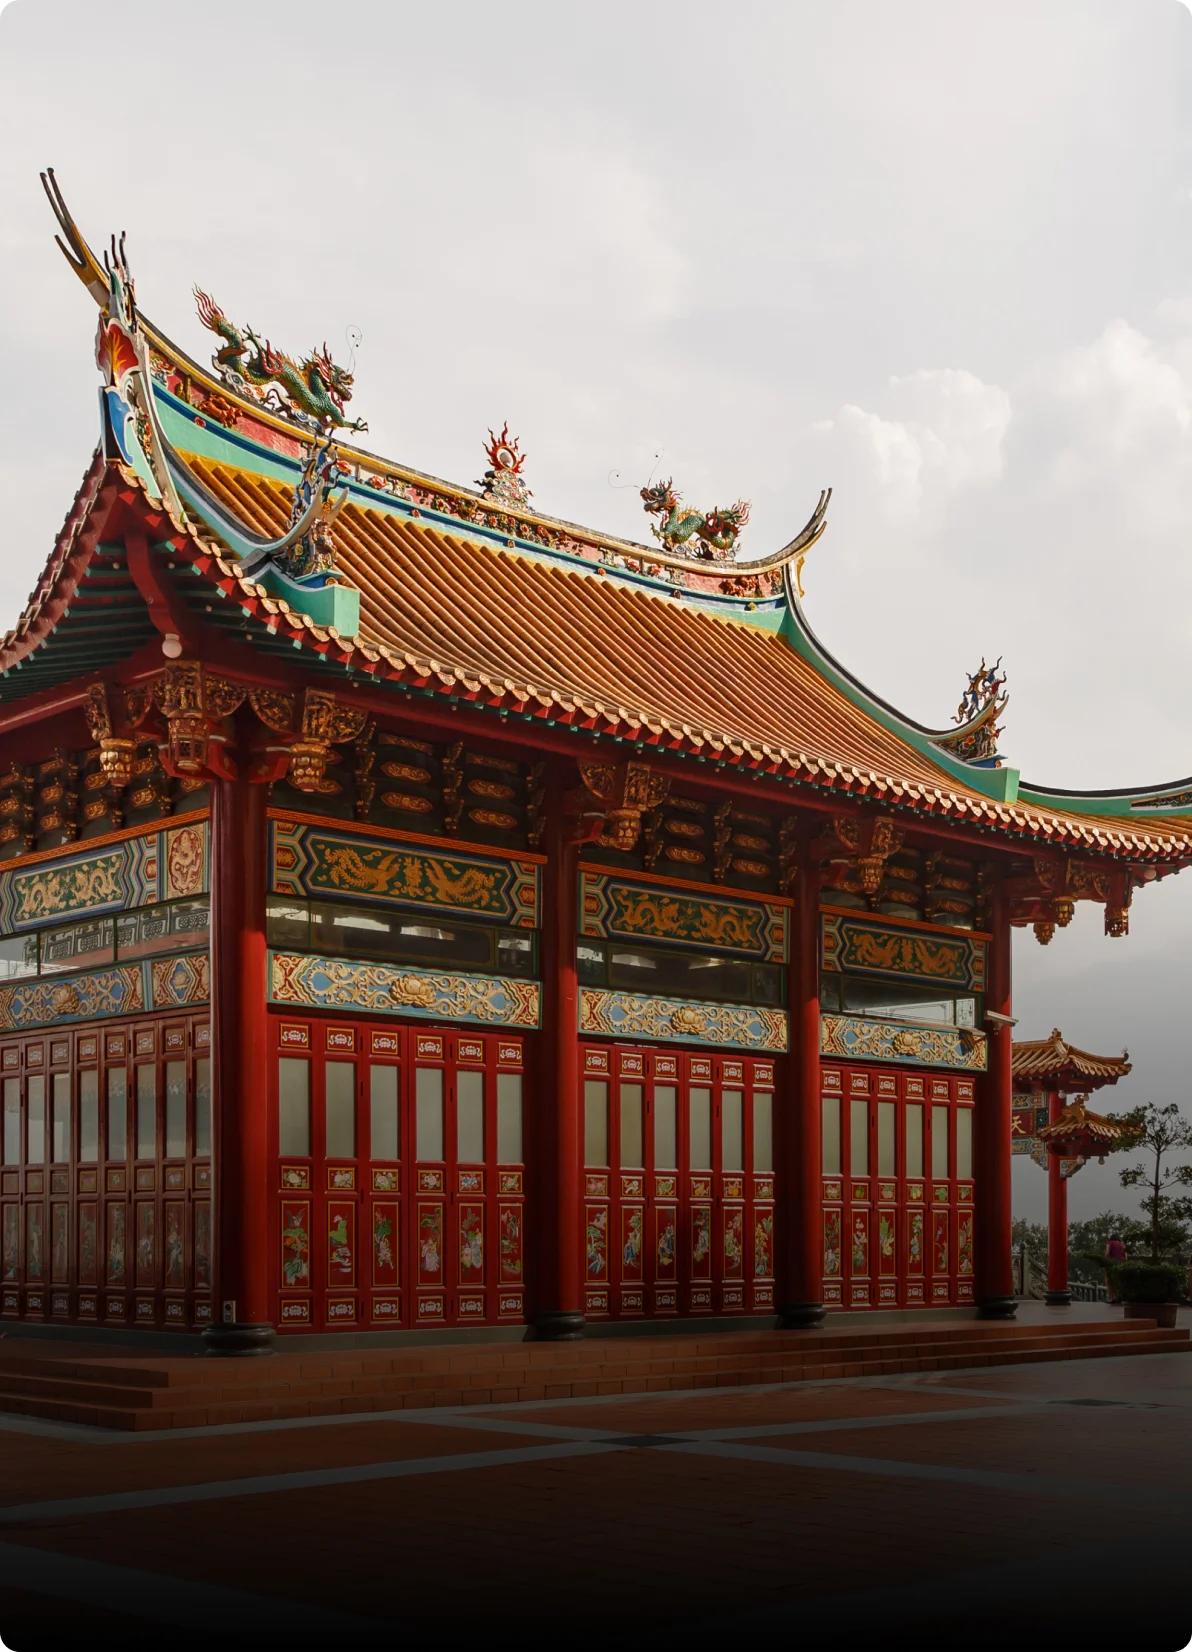 Chin-Swee Temple